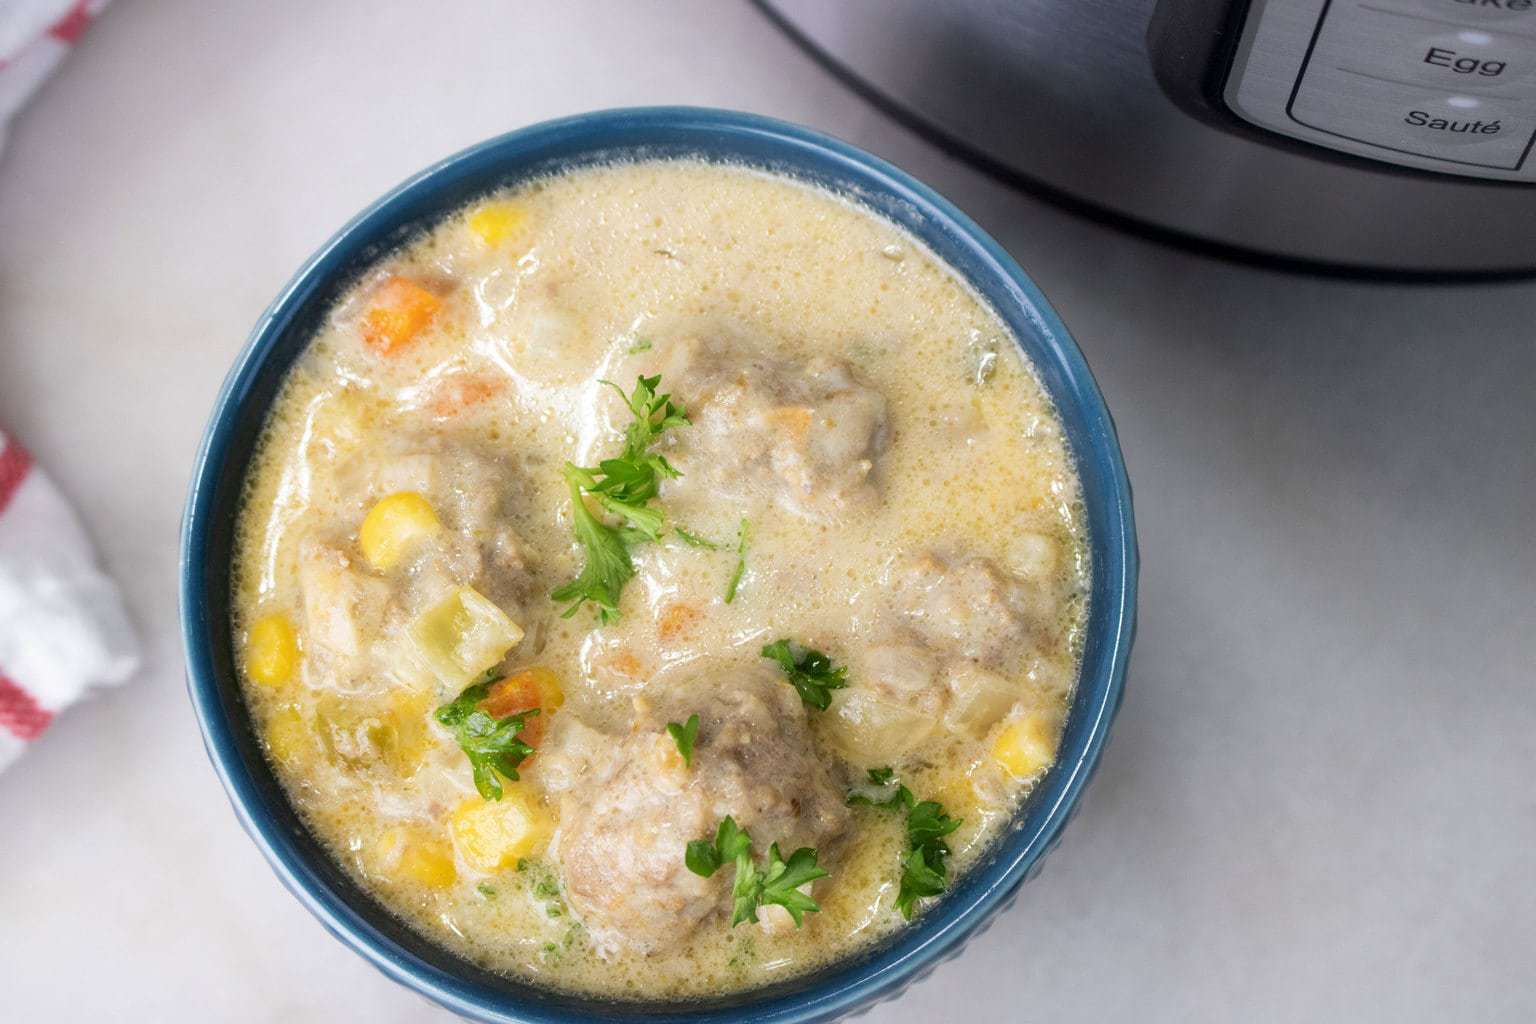 Instant Pot Meatballs Cheesy Soup, Sometimes in life, some things fit perfectly together.  This Instant Pot Meatballs Soup recipe is not only cheesy, but creamy and delicious!